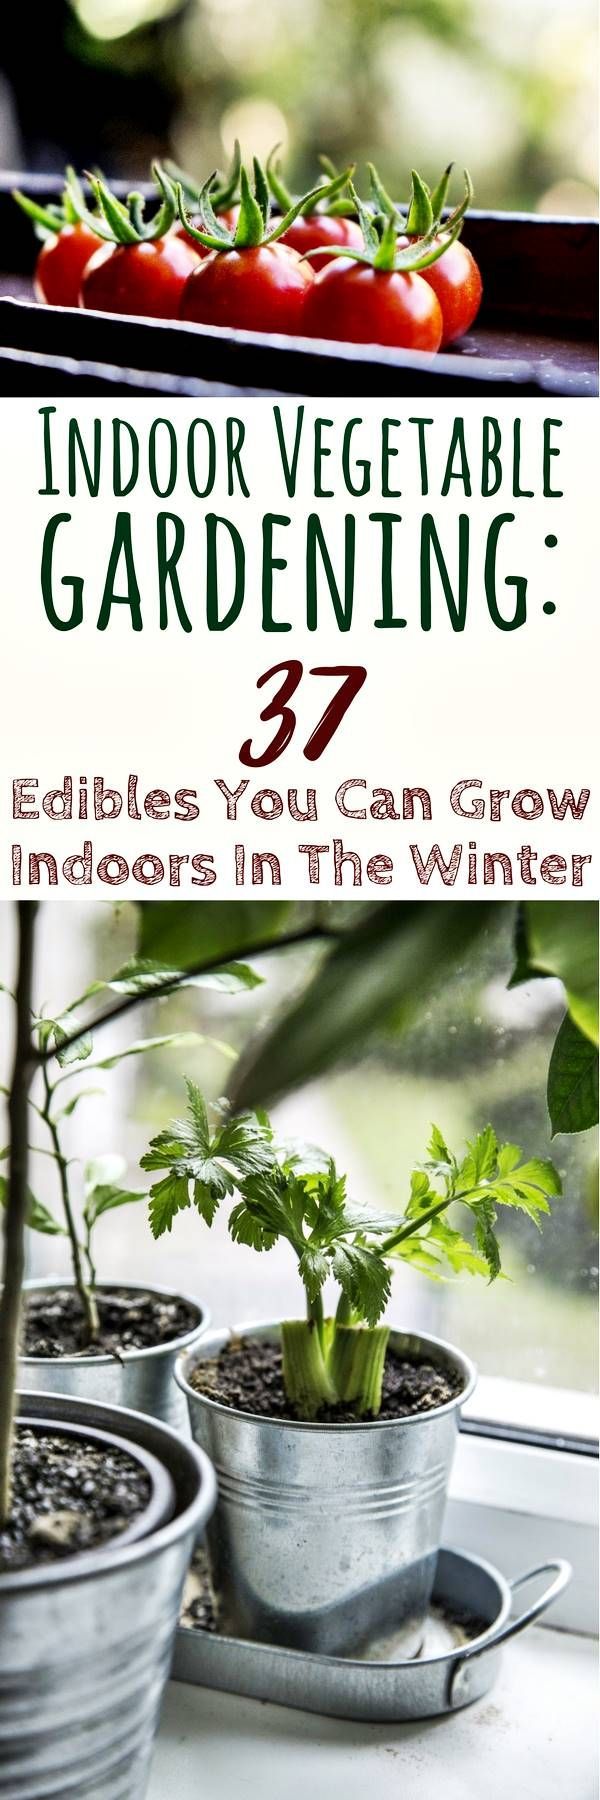 Indoor Vegetable Gardening: 37 Edibles You Can Grow Indoors In The Winter – As a prepper, one of the essential skills is for you